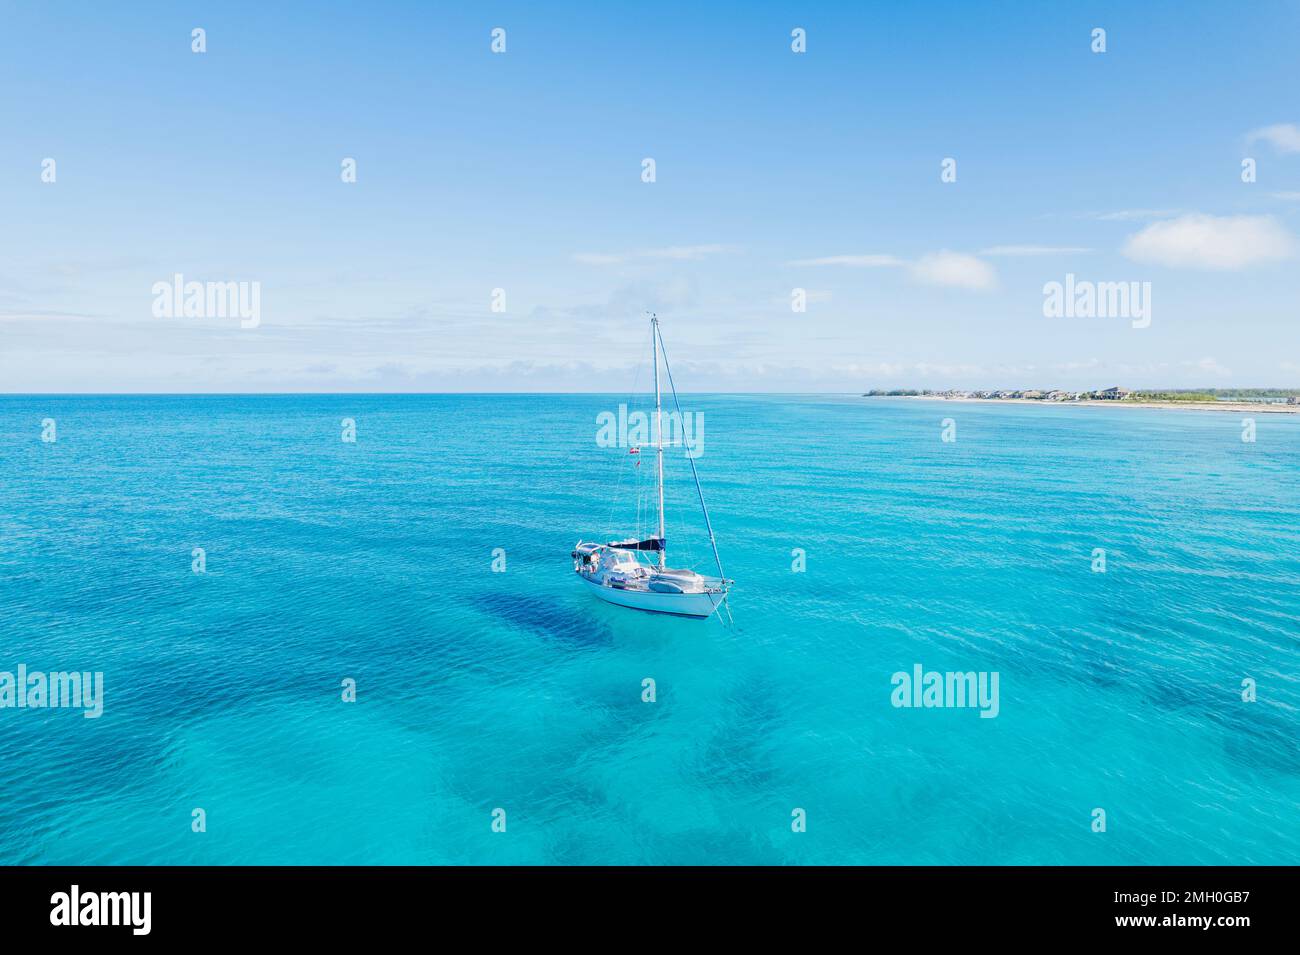 Aerial of Sailboat Anchored in Turquoise Blue Water in Bimini, Bahamas Stock Photo